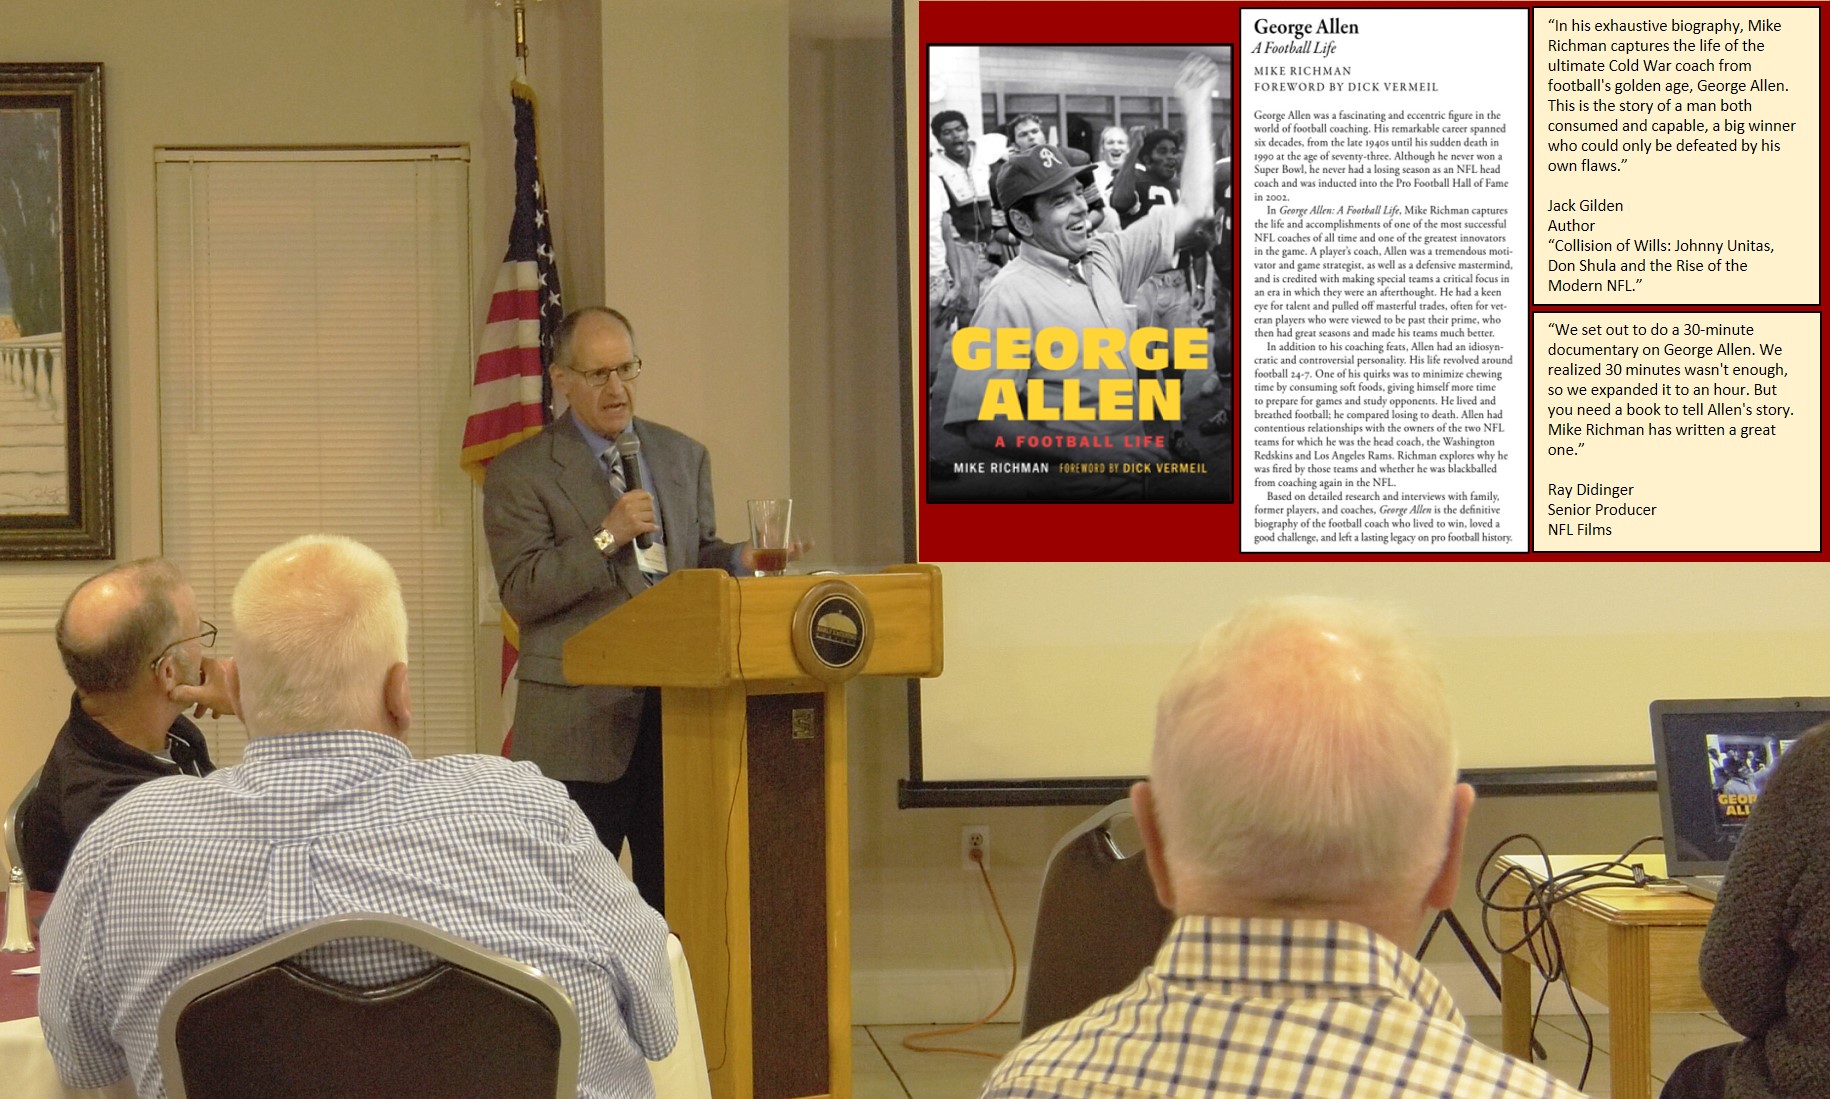 Mike Richman discusses his newly published book, George Allen: A Football Life, in an appearance at the Shenandoah Valley Athletic Club.